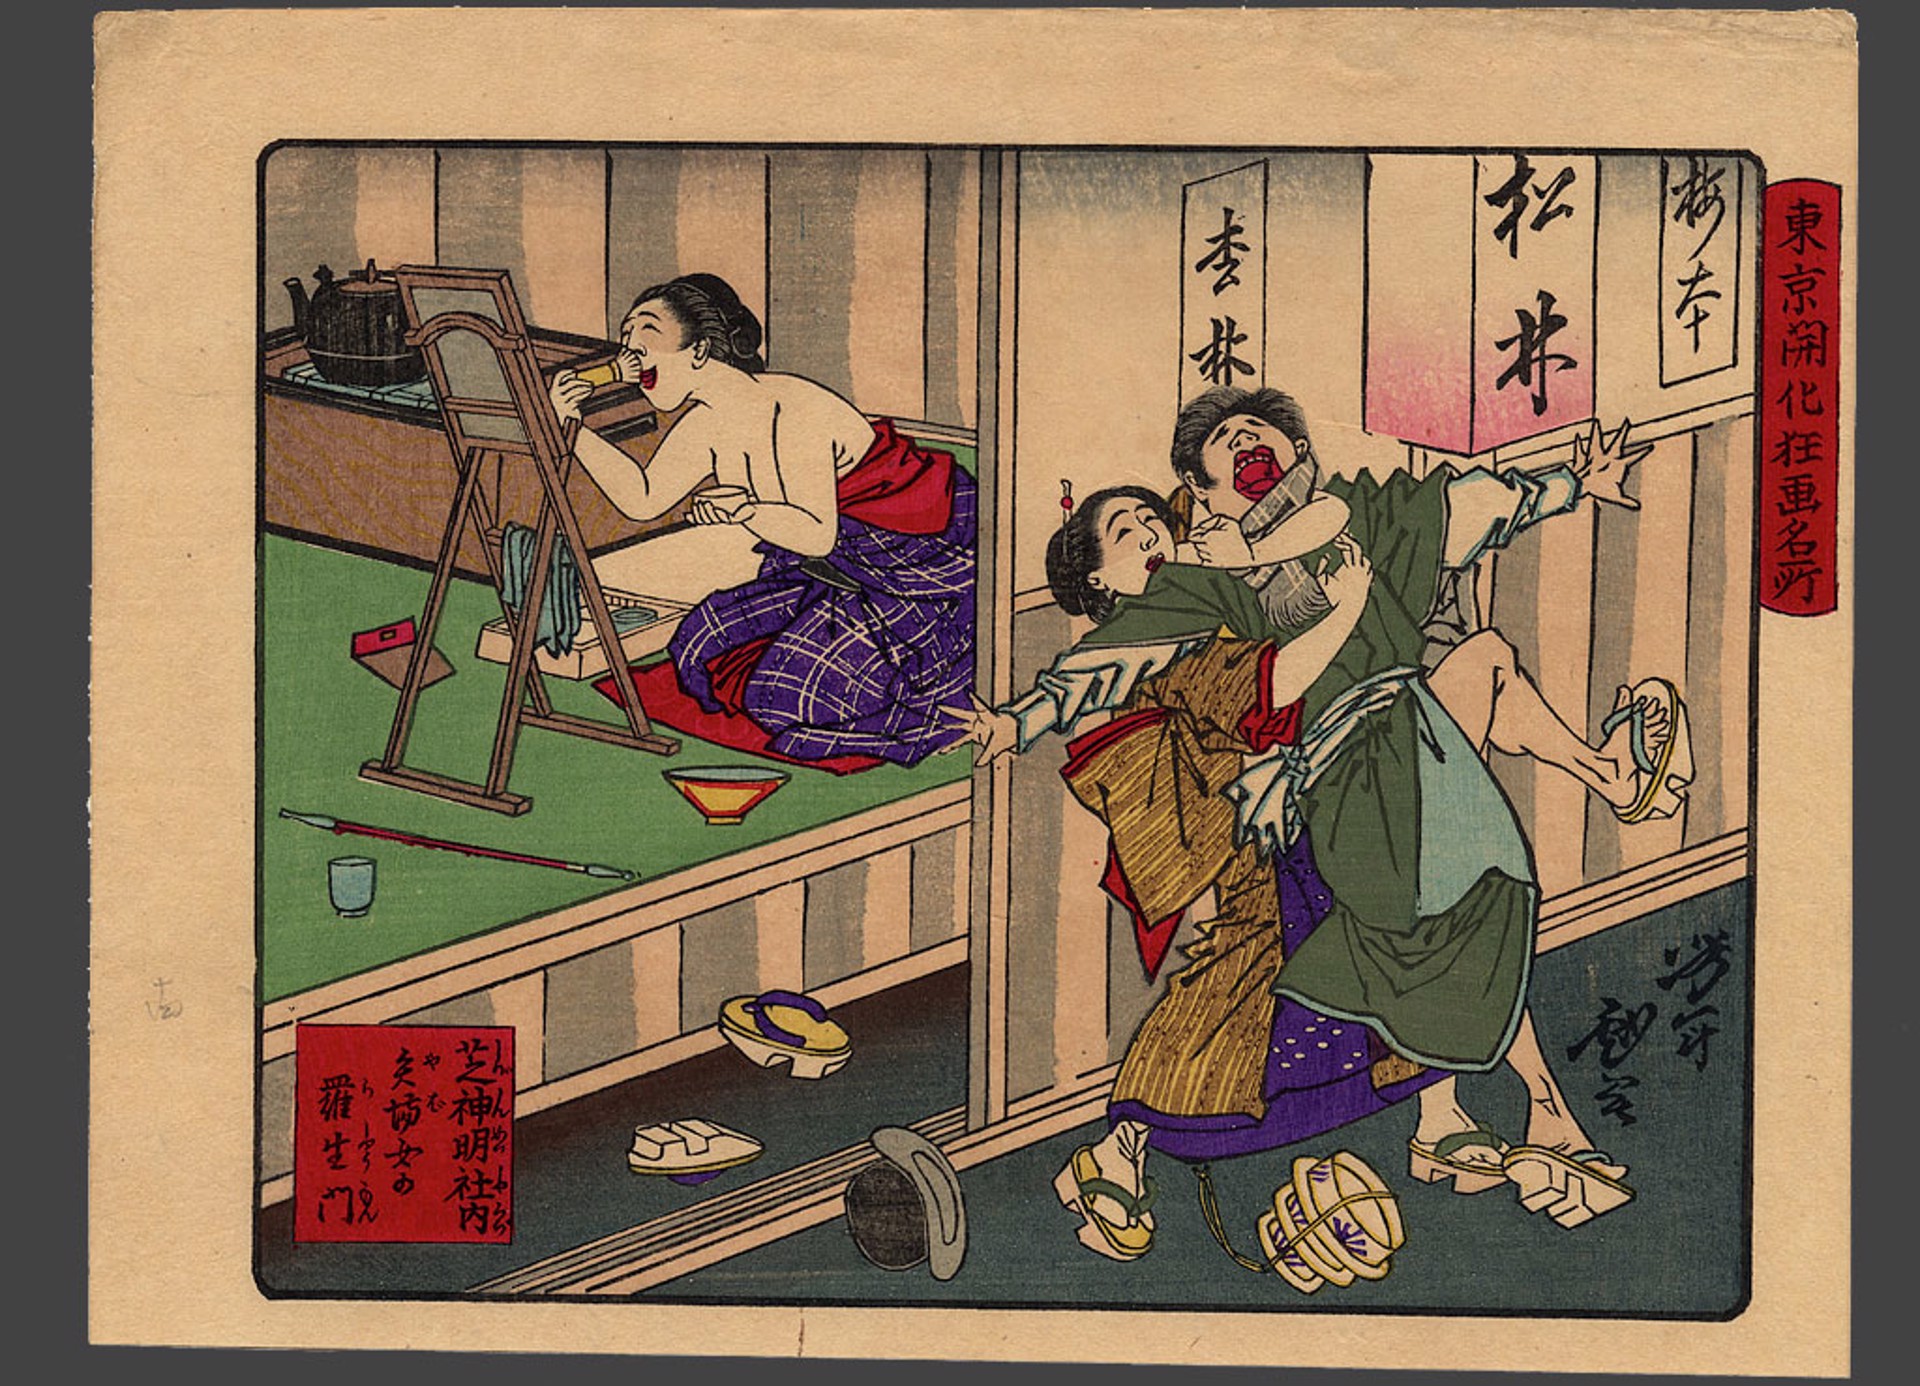 A woman keeps a peeping tom from spying on the prostitute Rashomon at her make-up in Shiba Myojin Comic pictures of famous places amid the civiization of Tokyo by Yoshitoshi